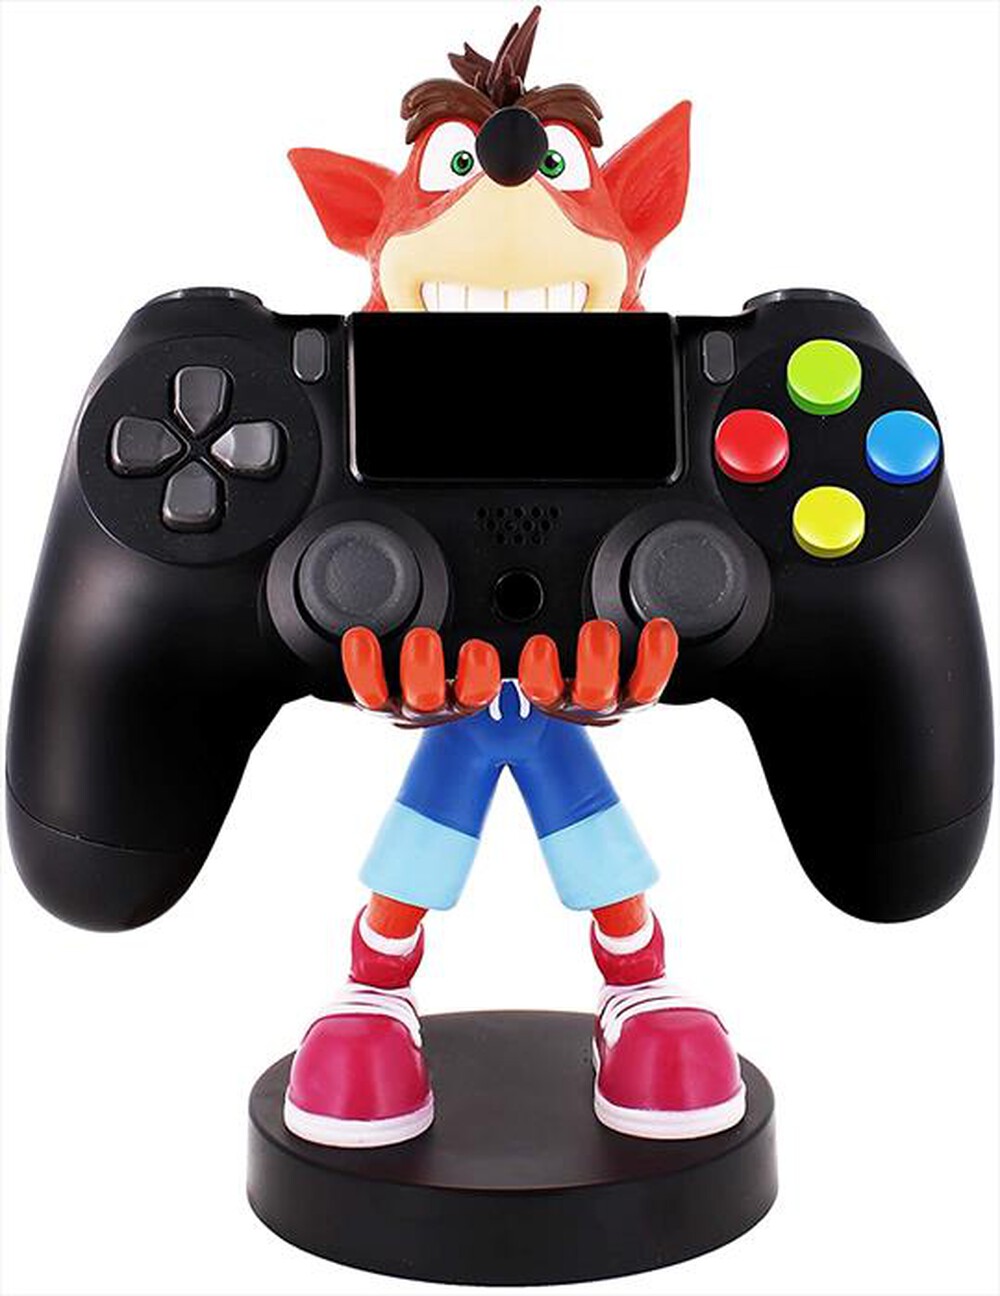 "EXQUISITE GAMING - CRASH BANDICOOT TRILOGY CABLE GUY"